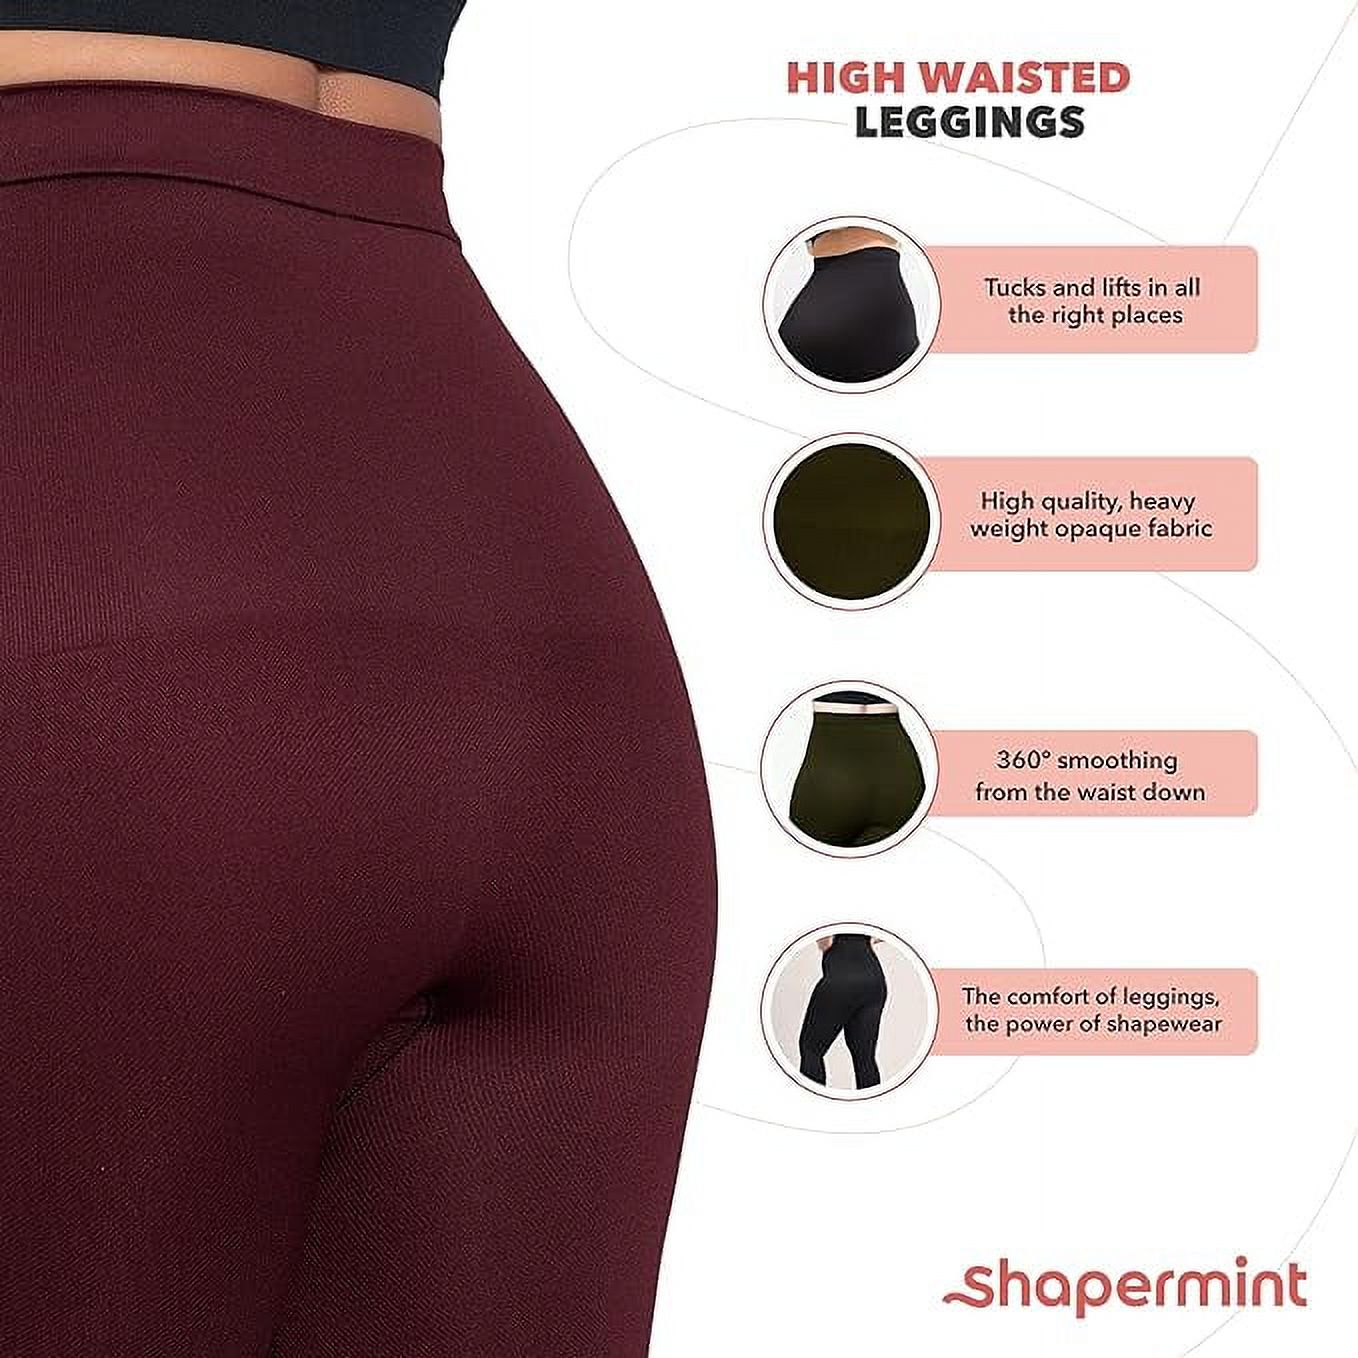 Shapermint Women’s High Waisted Shaping Leggings - image 5 of 6